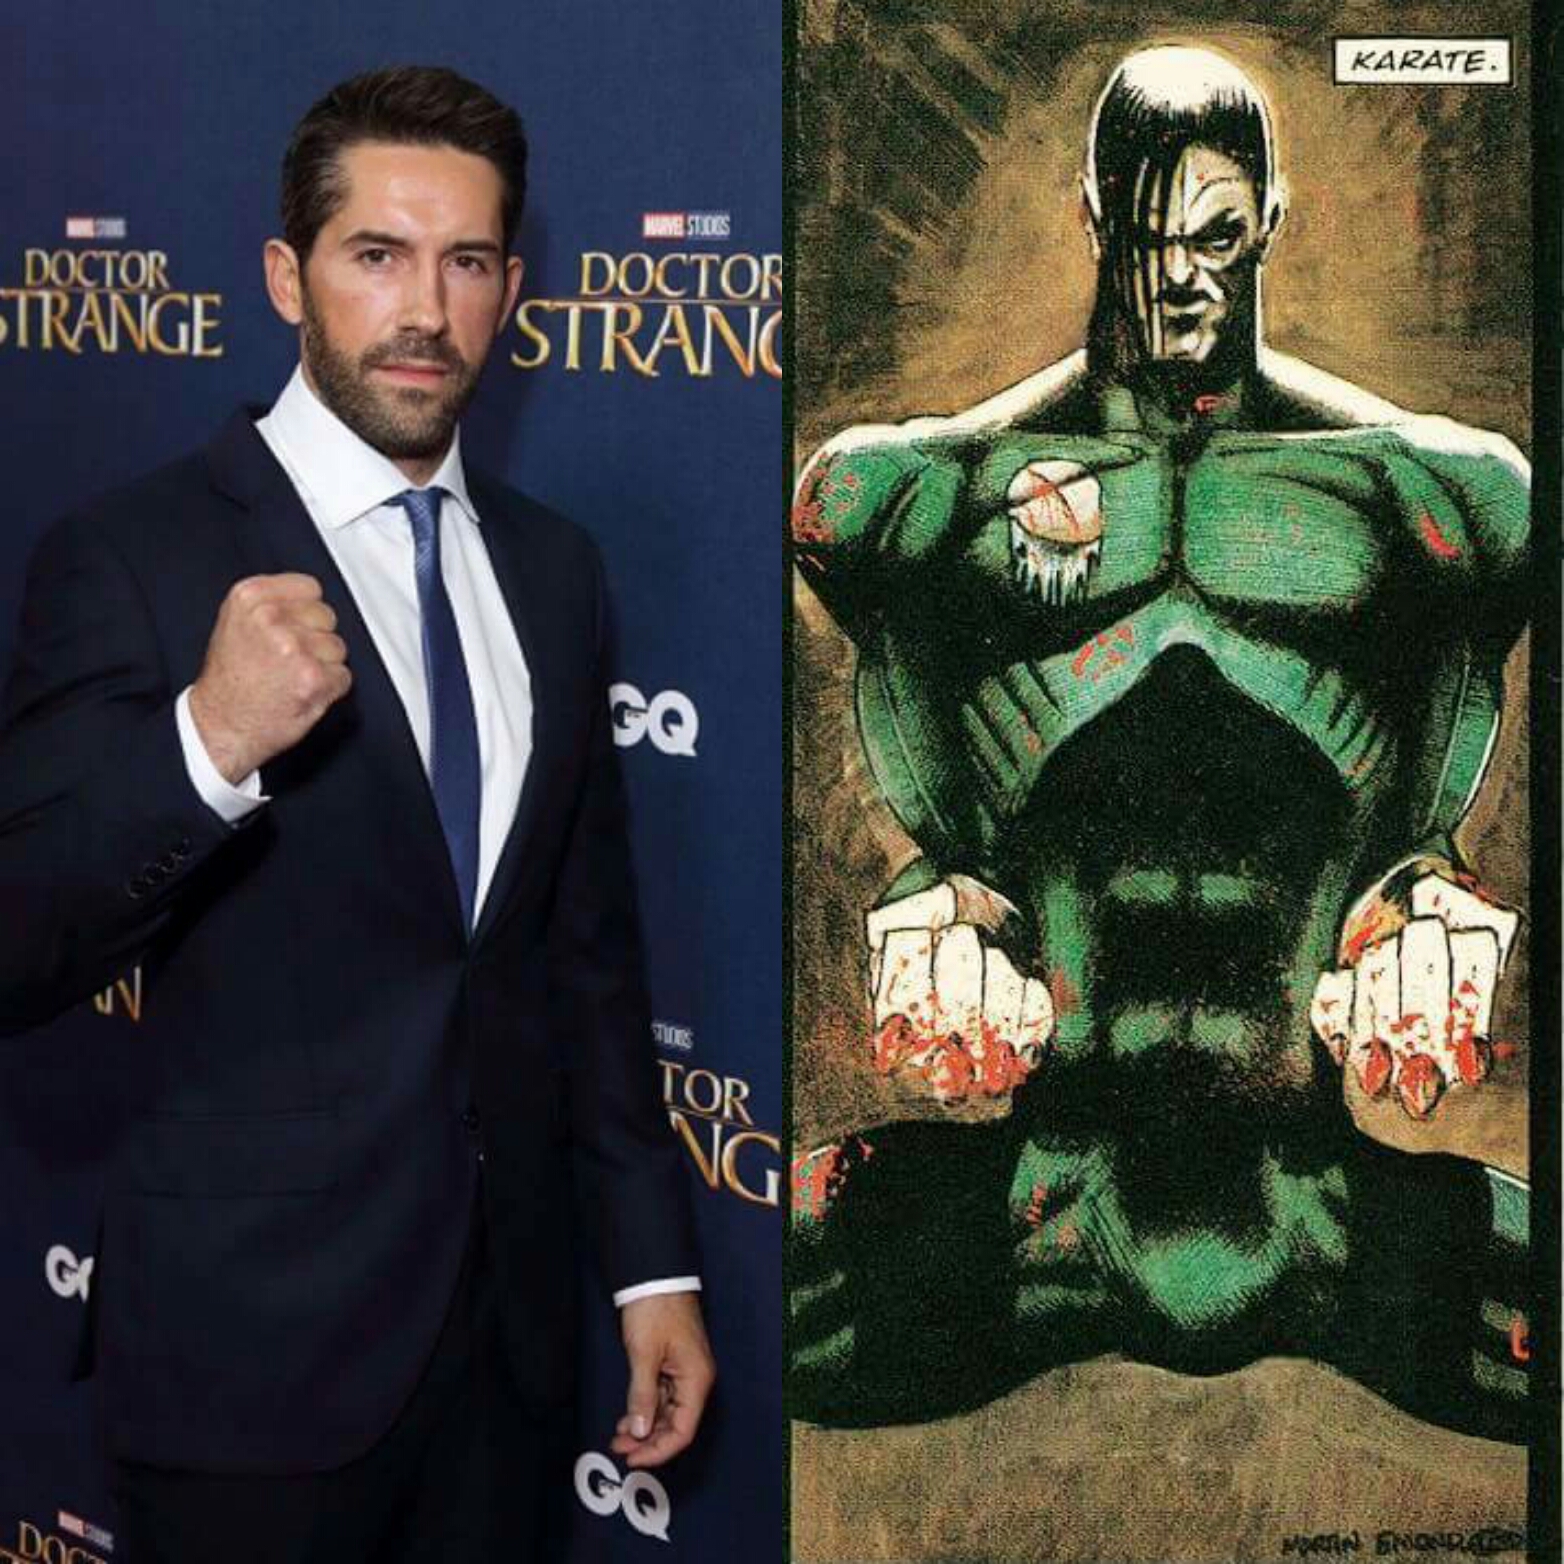 ACCIDENT MAN: Martial Arts Star Scott Adkins To Star, Cast Confirmed For  Jesse V. Johnson's New Comic Book Adaptation